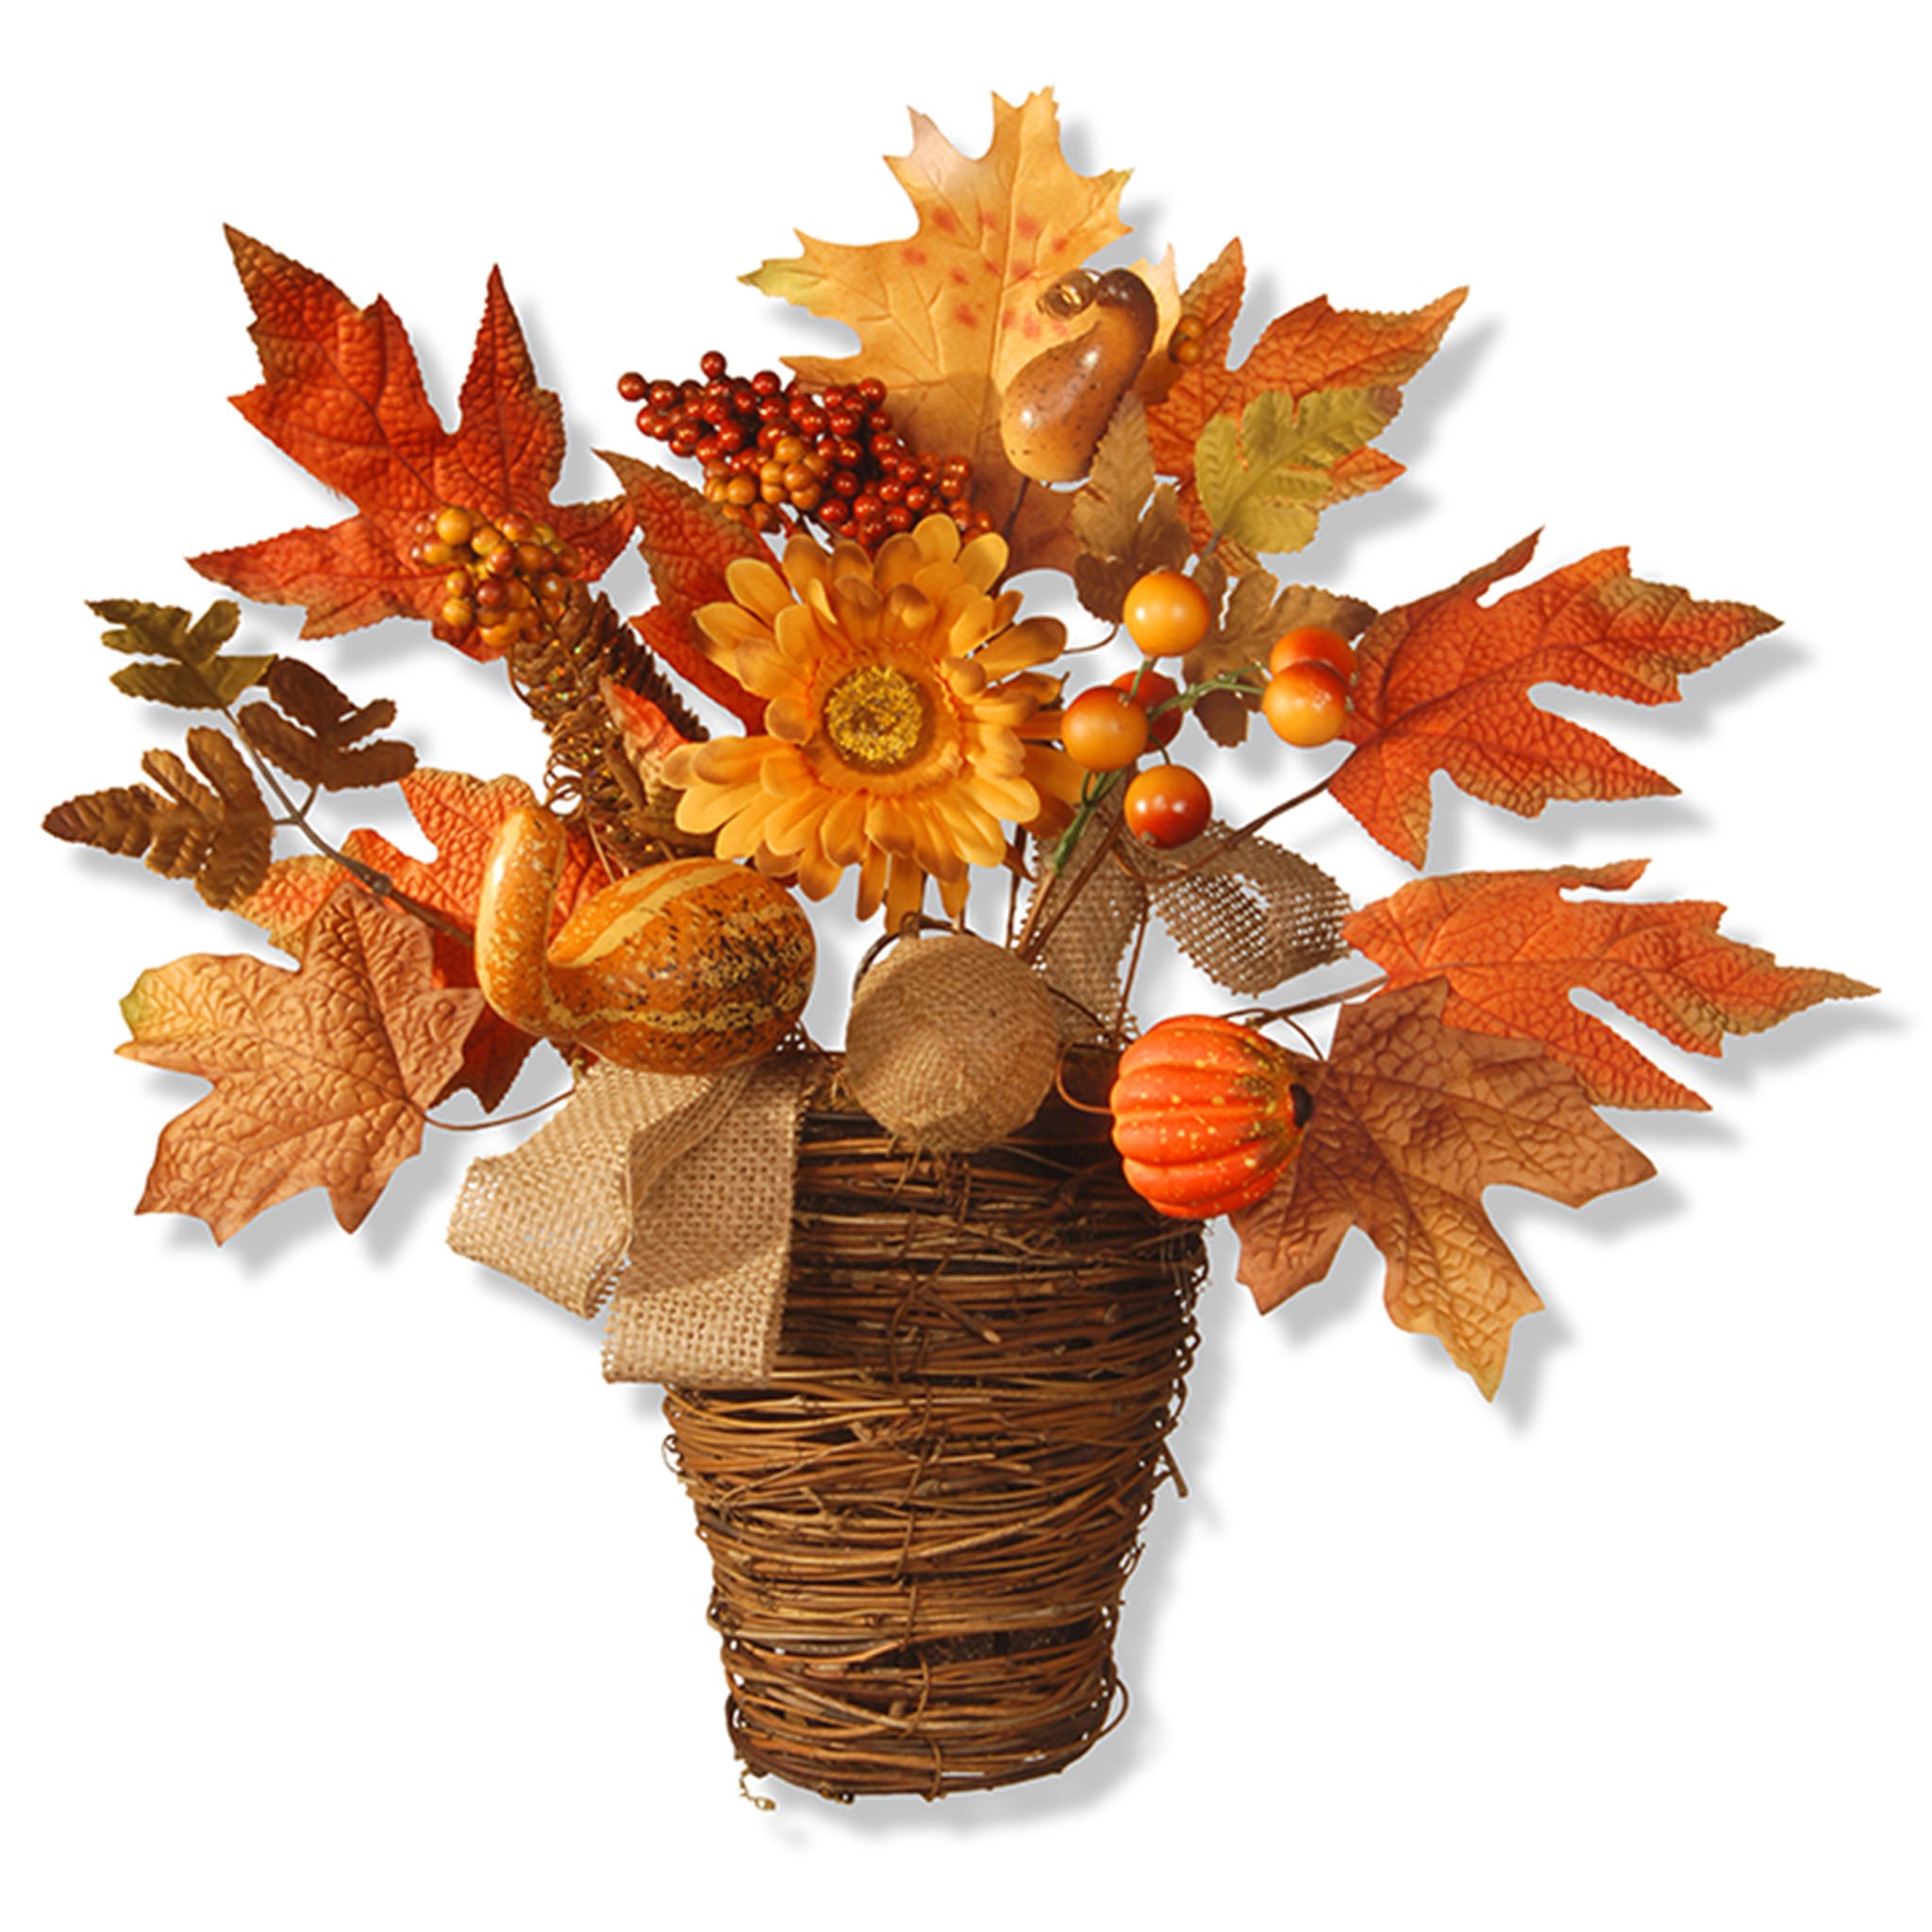 Artificial Flowers in Wicker Basket, Decorated with Pumpkins, Gourds, Berry Clusters, Burlap, Maple Leaves, Autumn Collection, 16 in